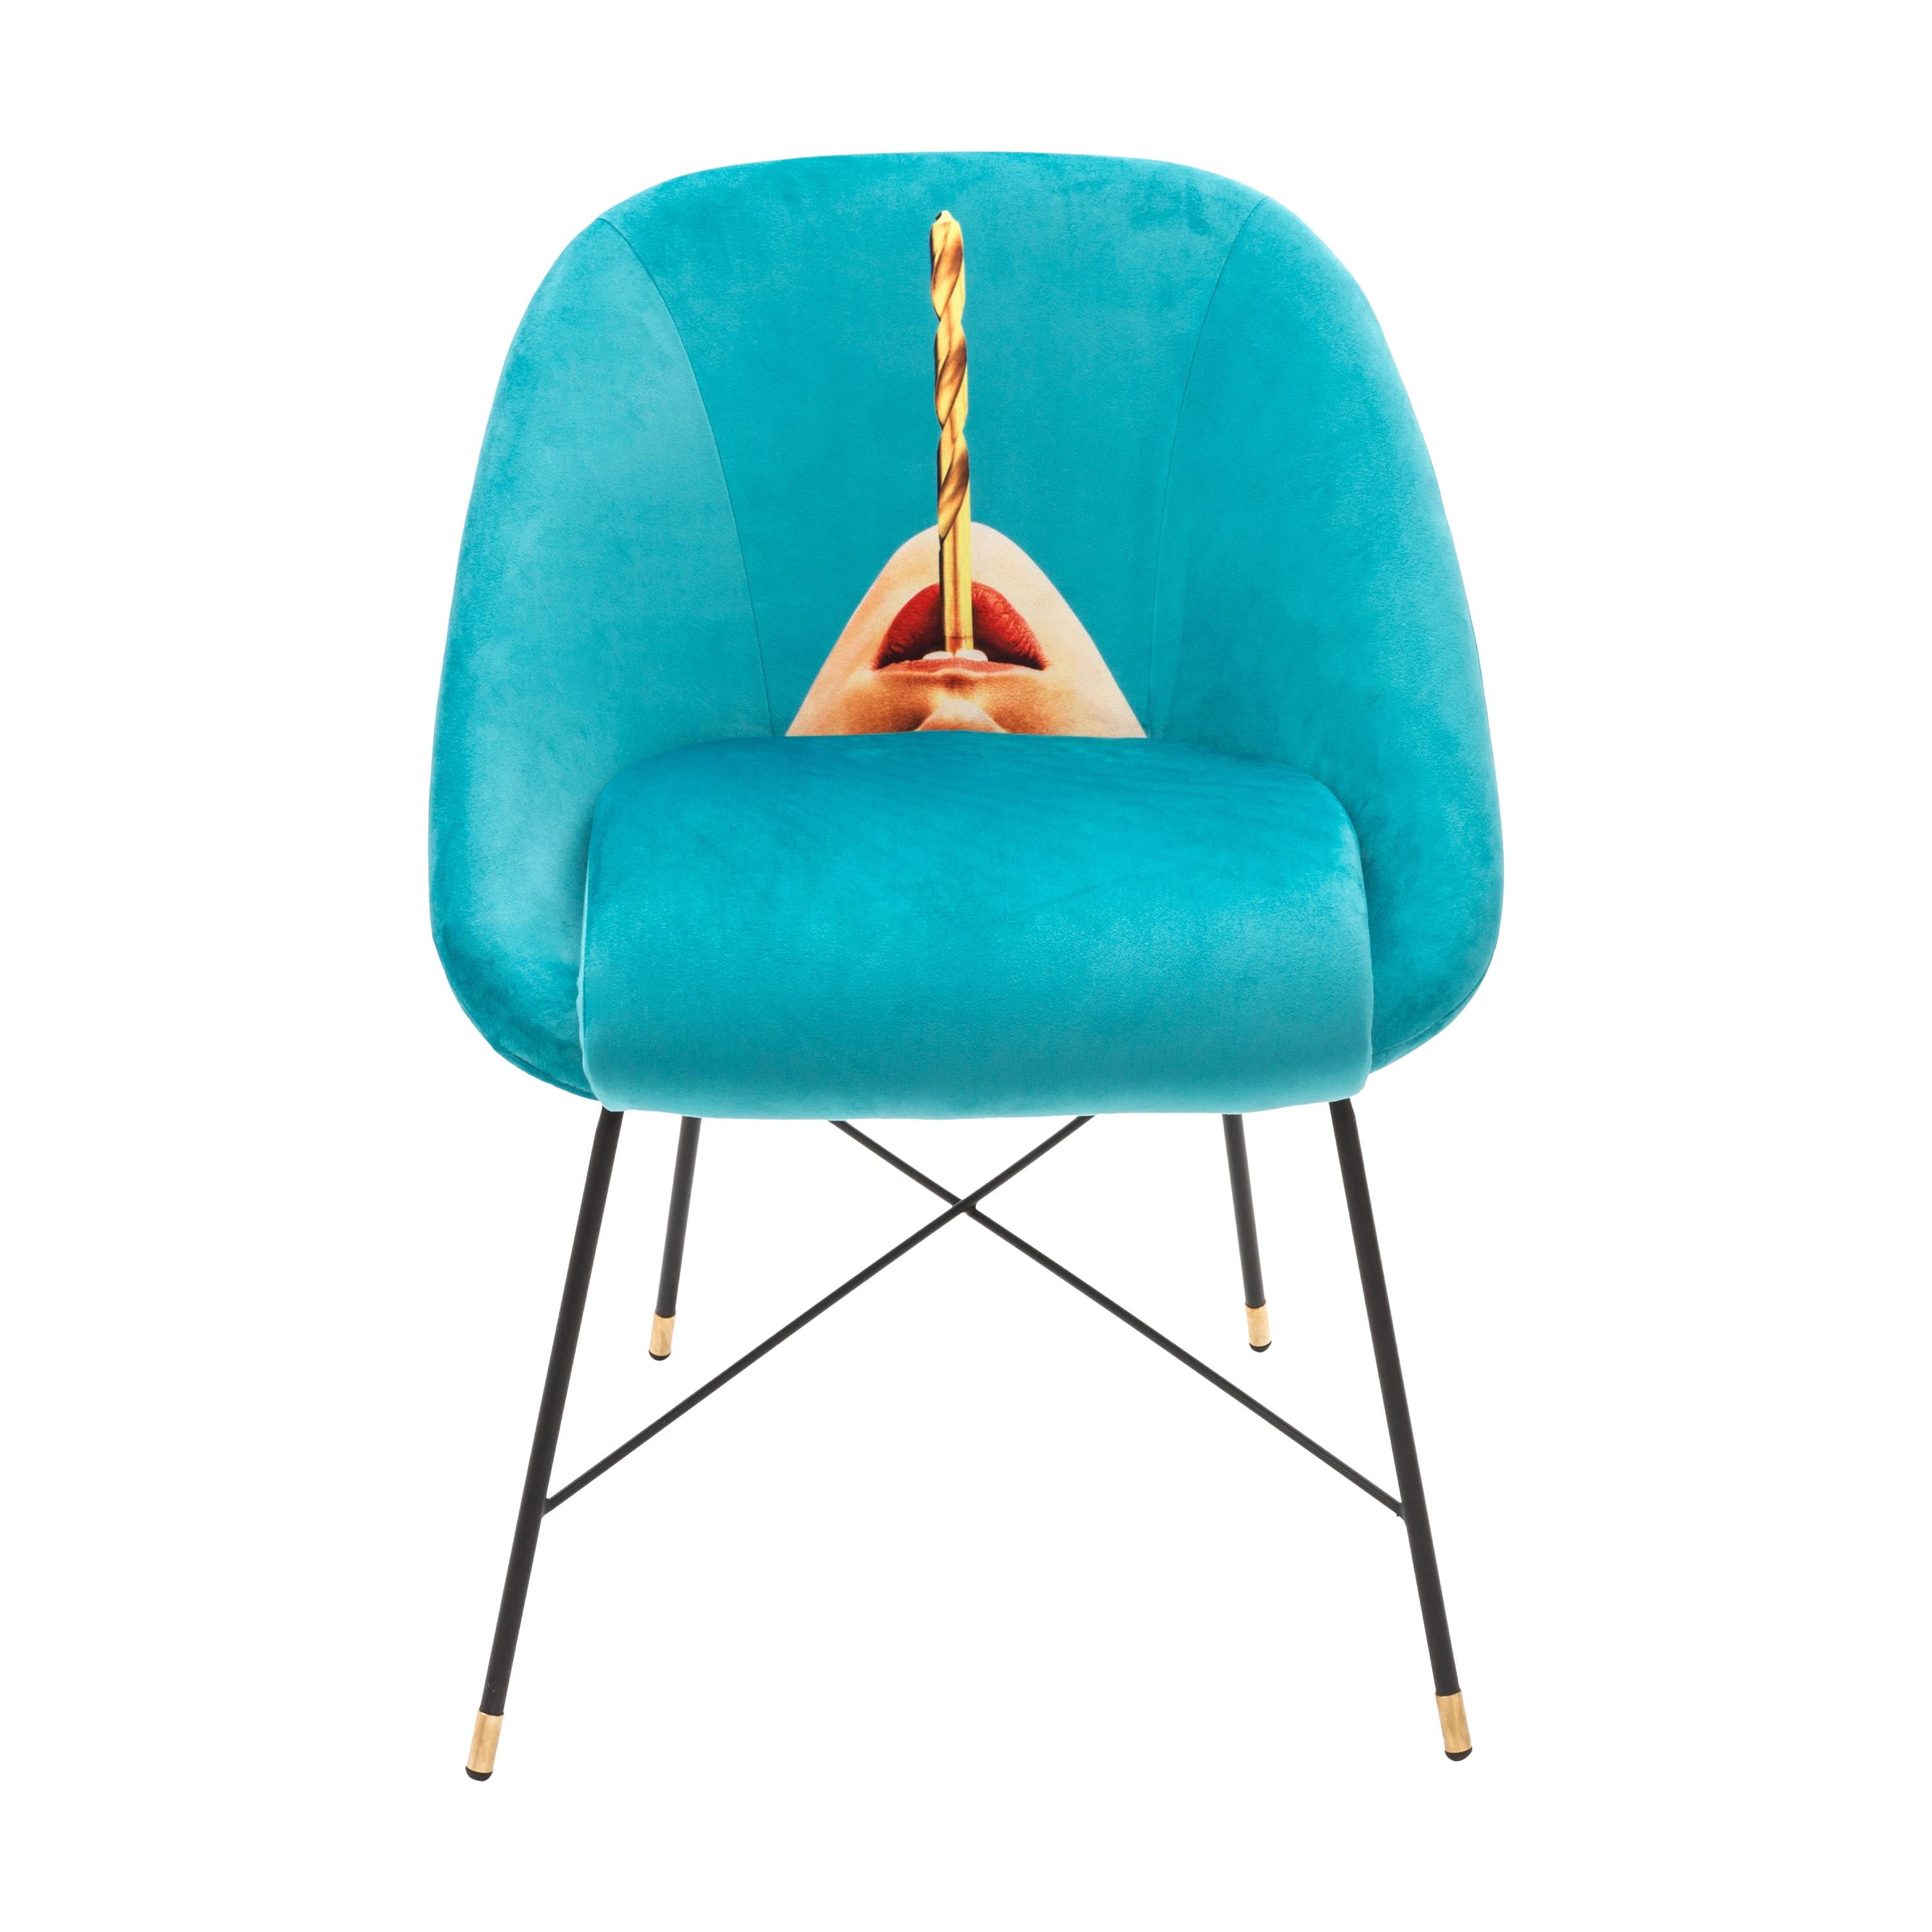 Seletti "Drill" Upholstered Occasional Chair by Toiletpaper